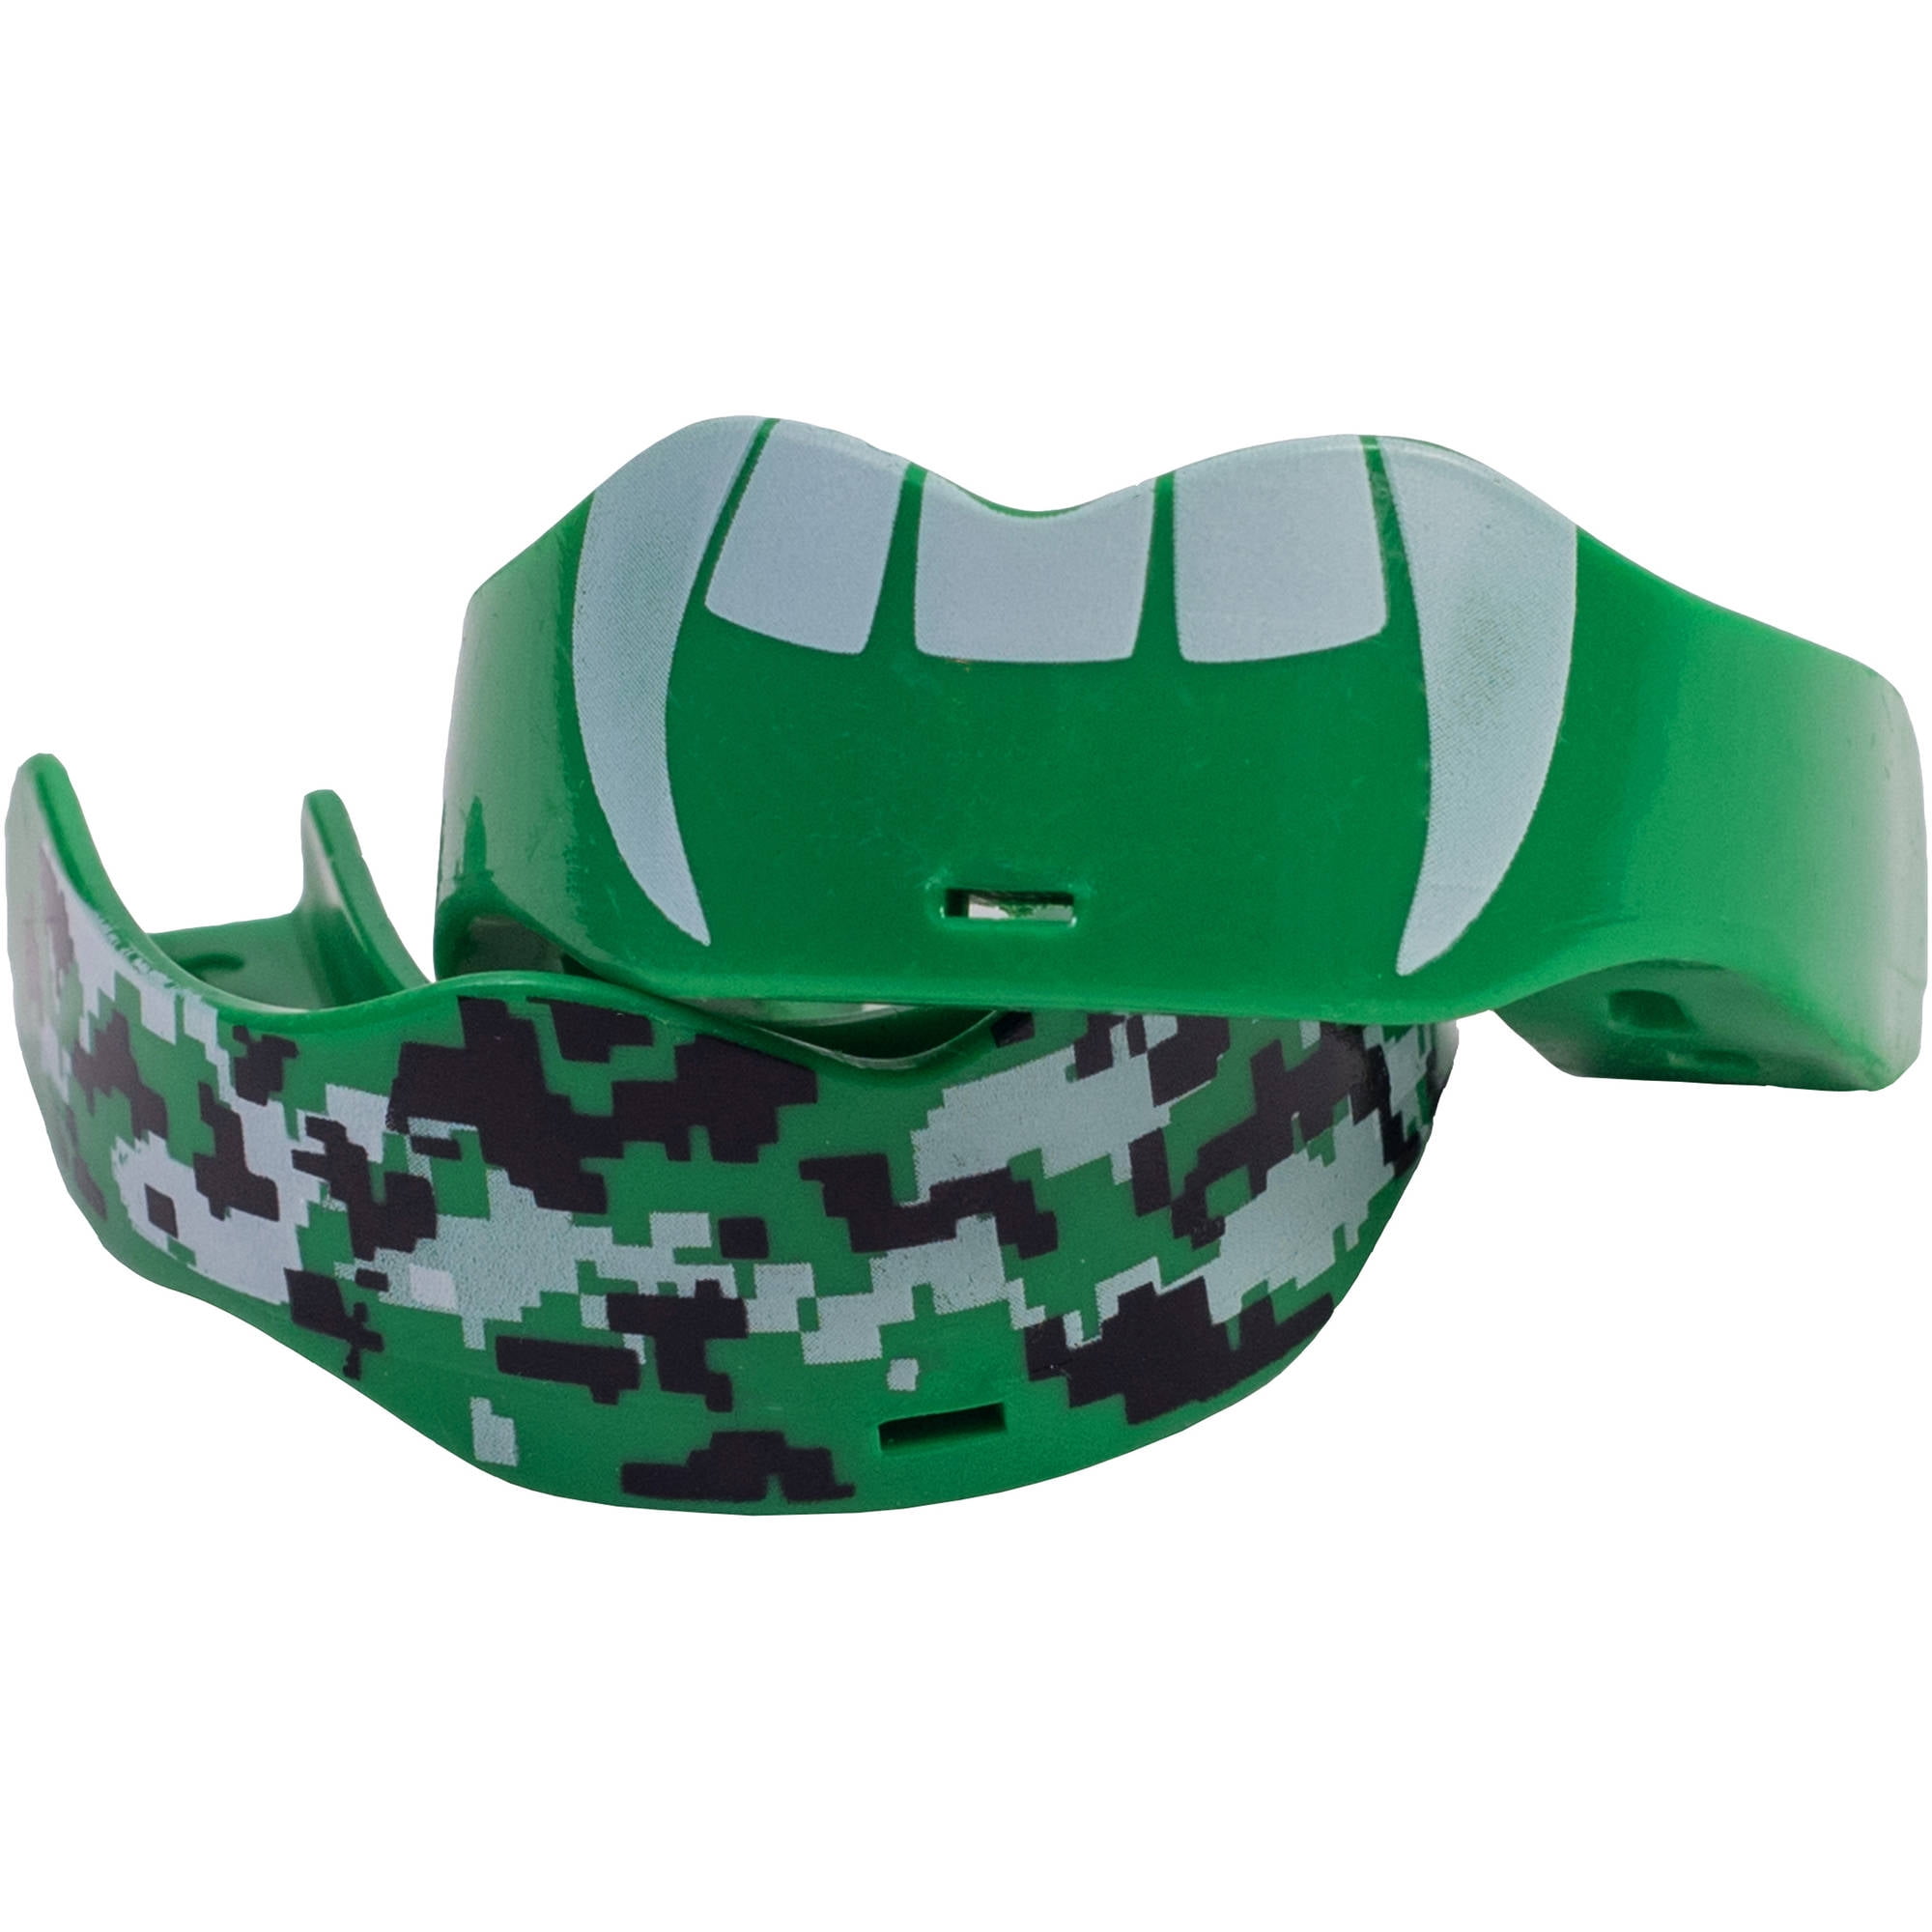 Neon Soldier Sports Custom 7312 Football Mouthguard 2 pack Details about    